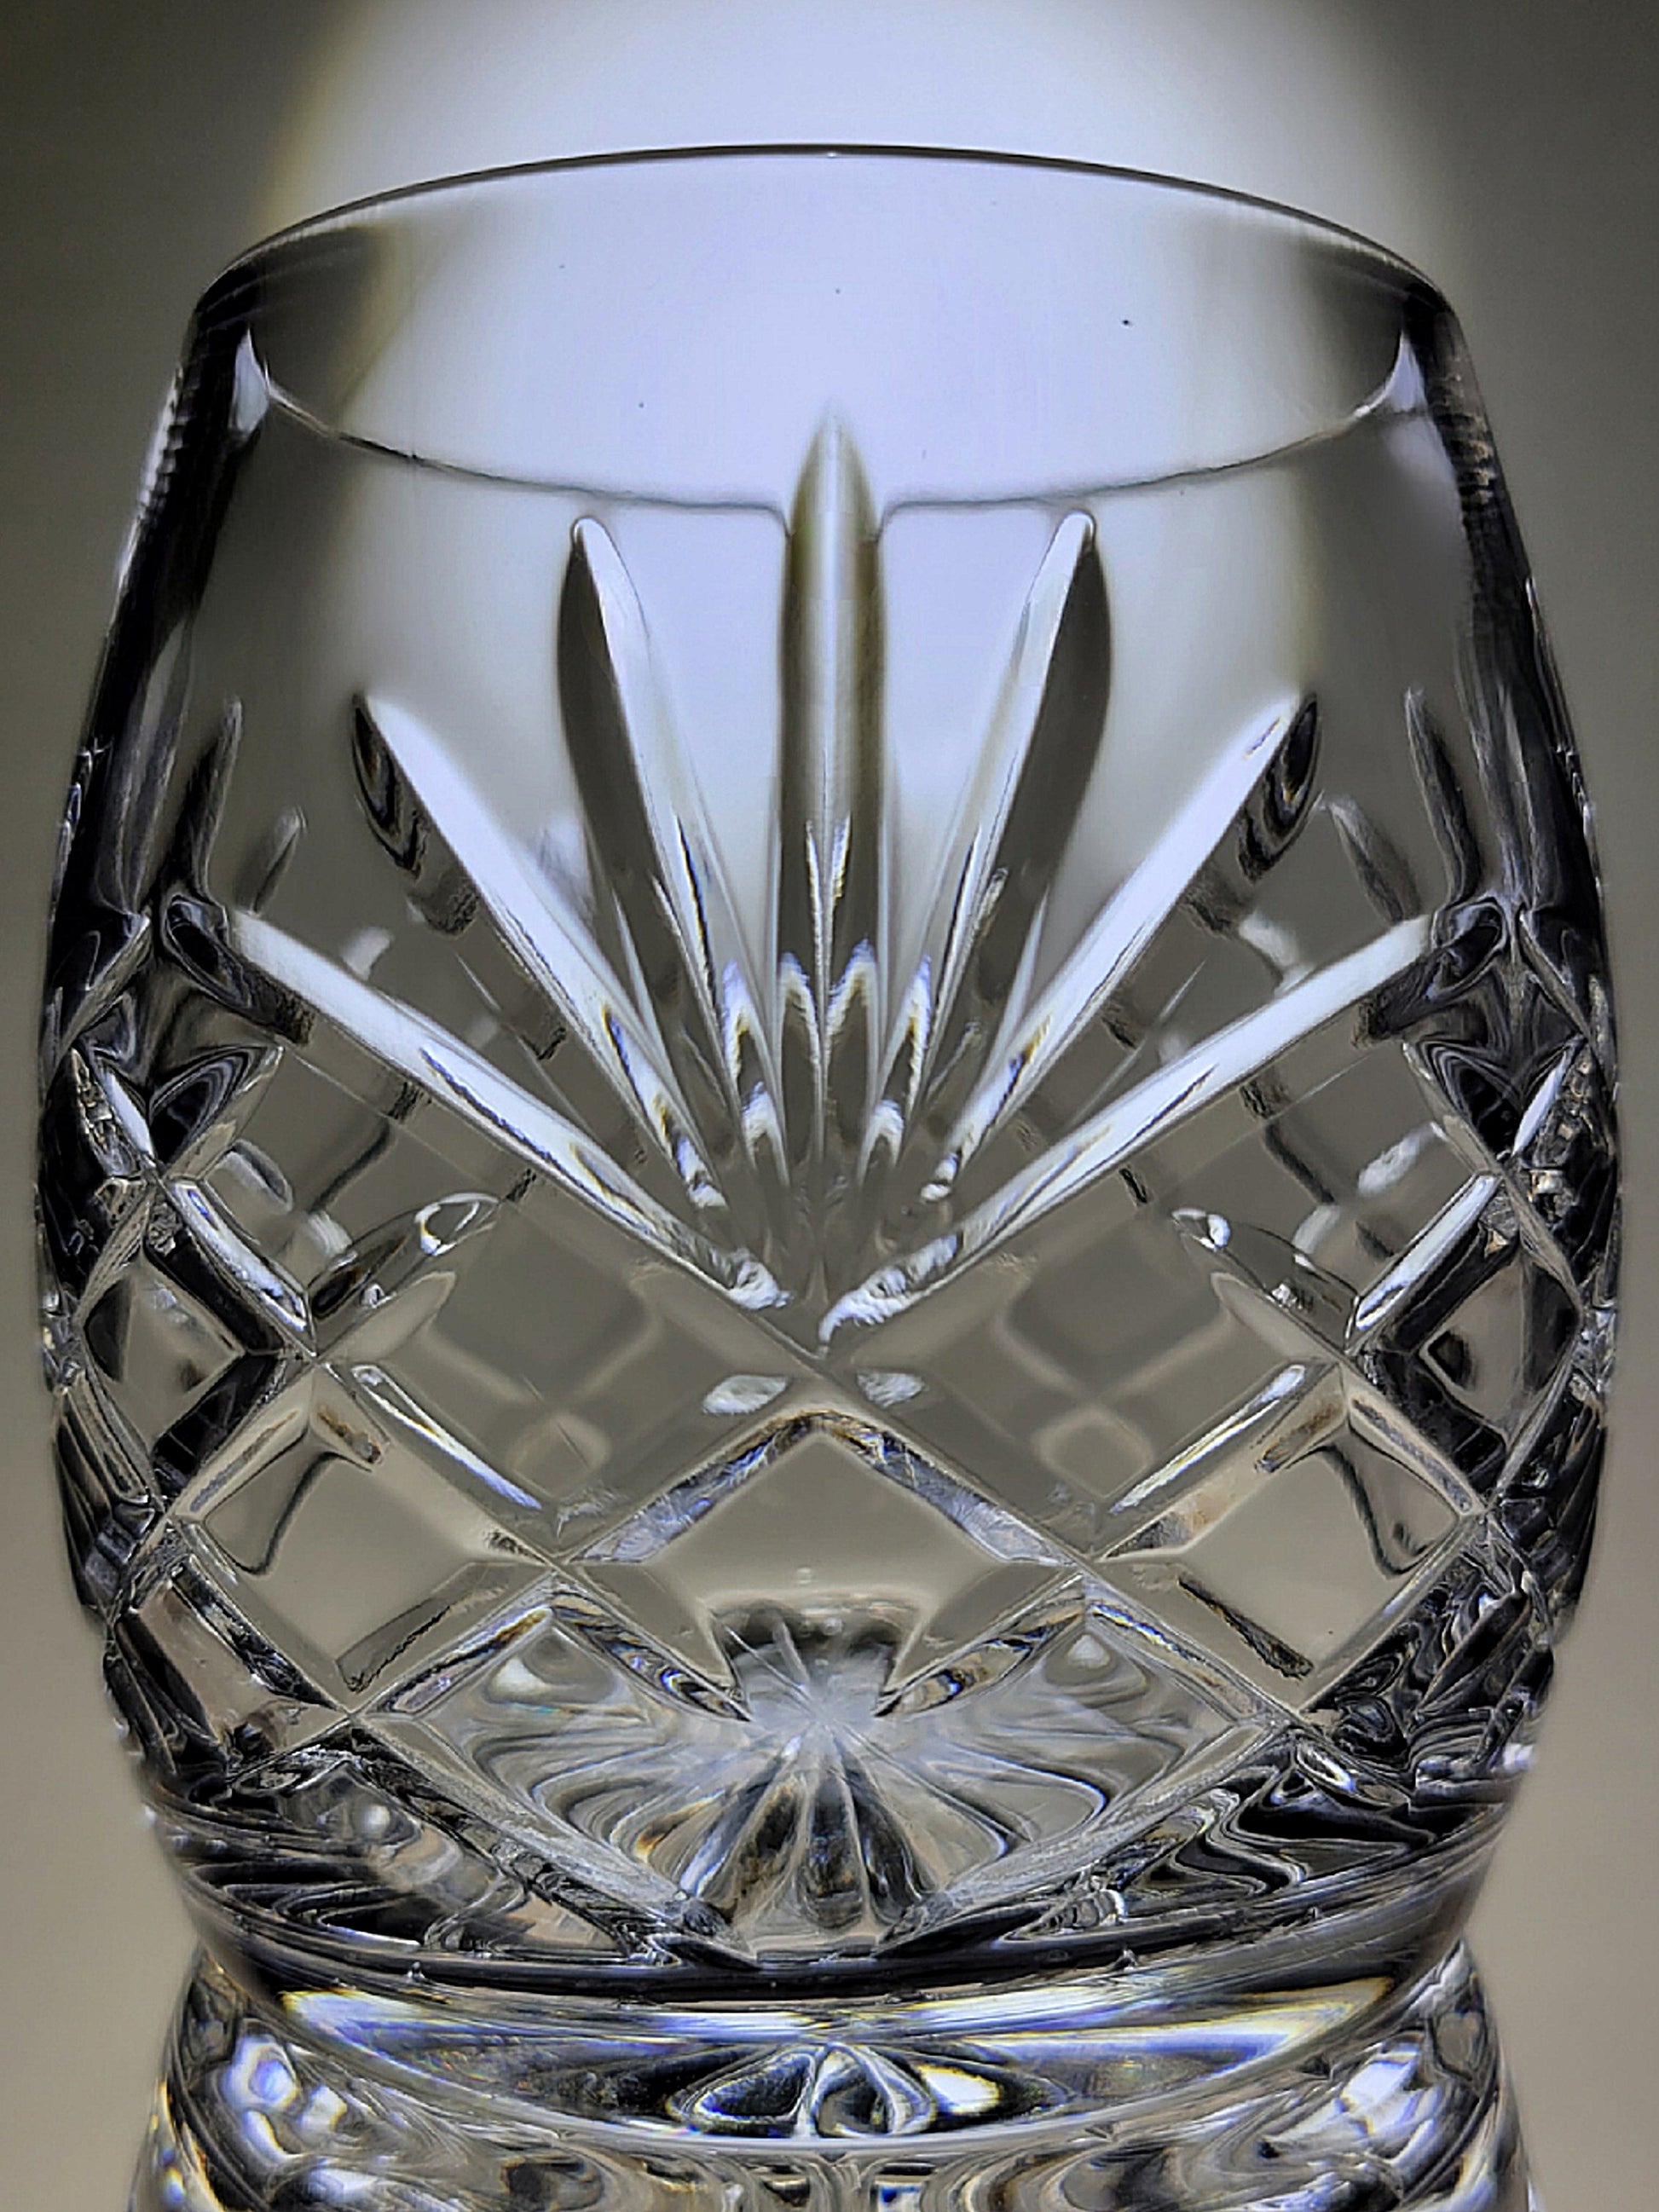 Cut Crystal Whiskey Glasses - Fit for a Leader